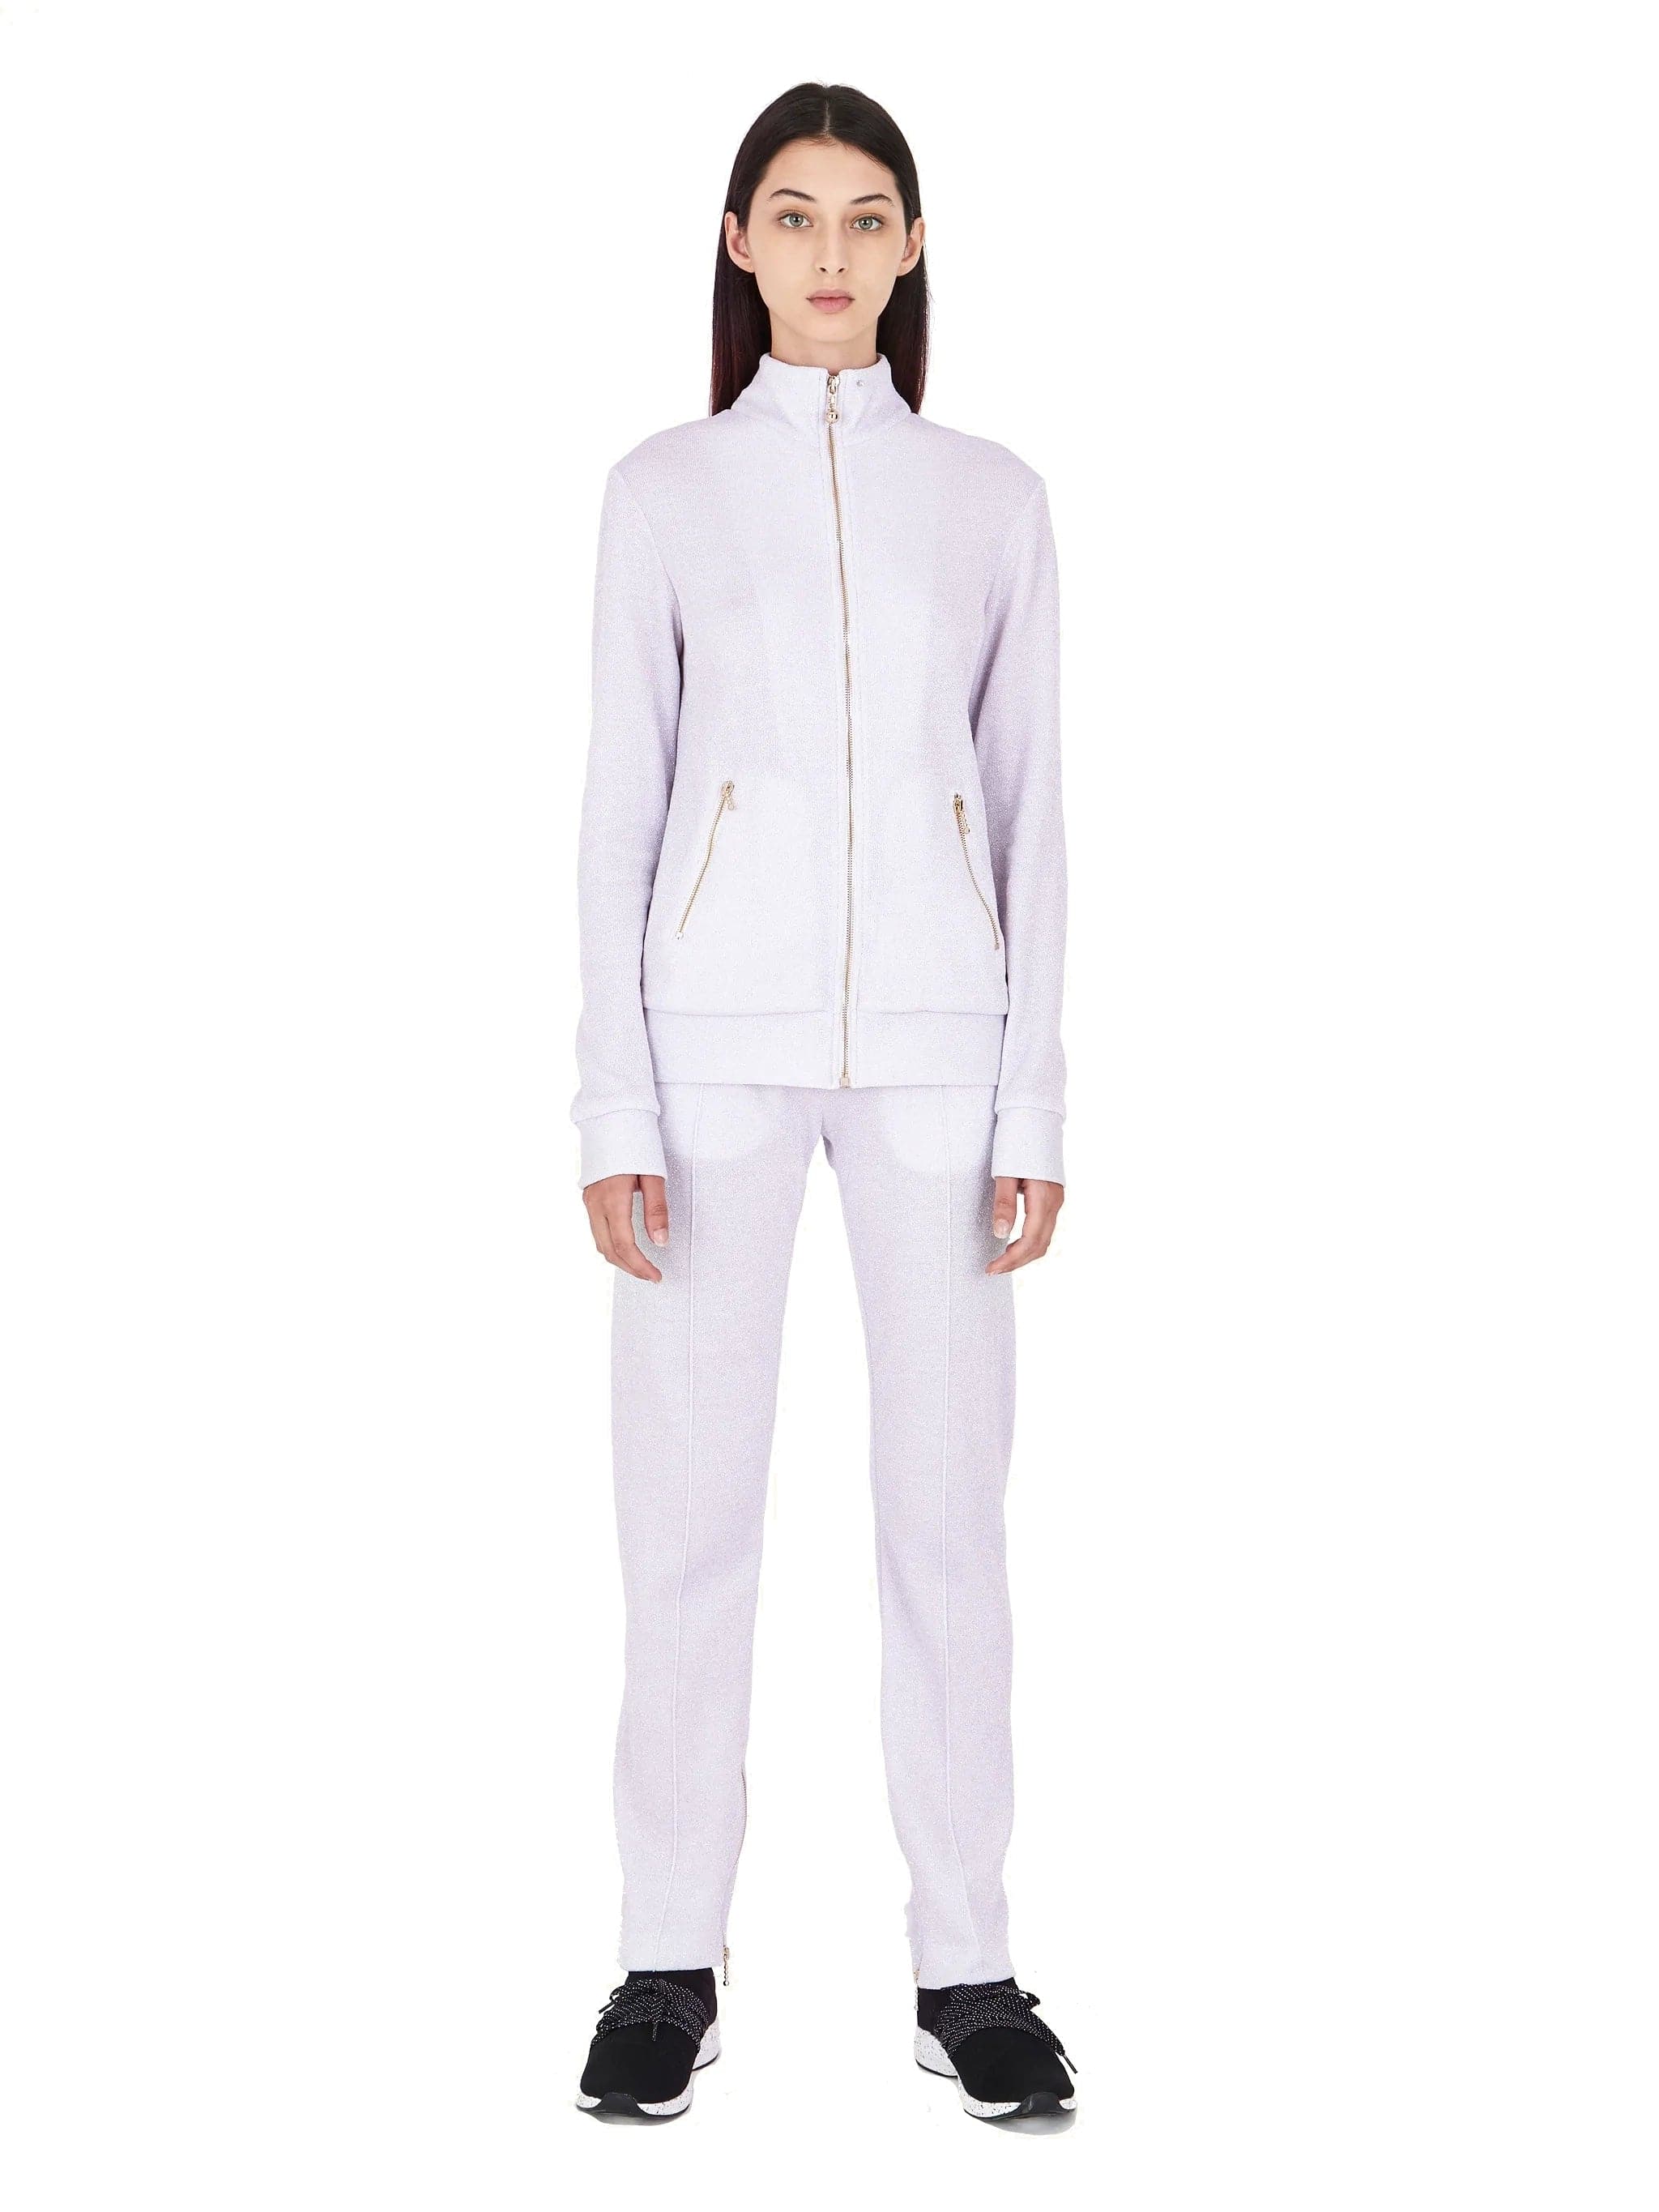 Bright White Tracksuit